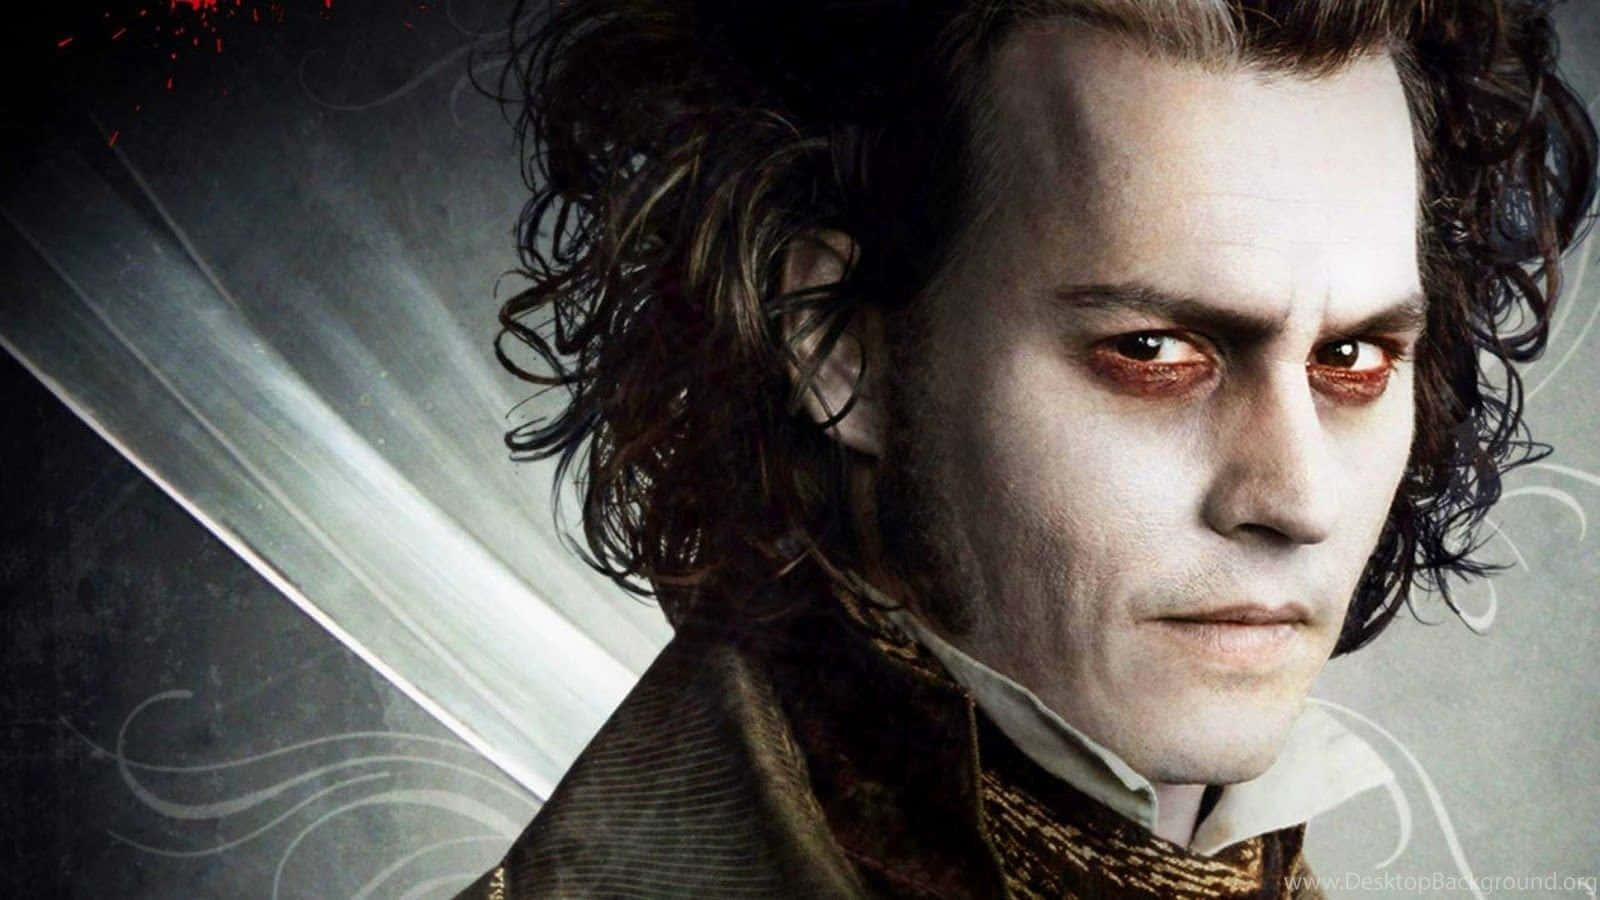 Johnny Depp brings an iconic performance in every film